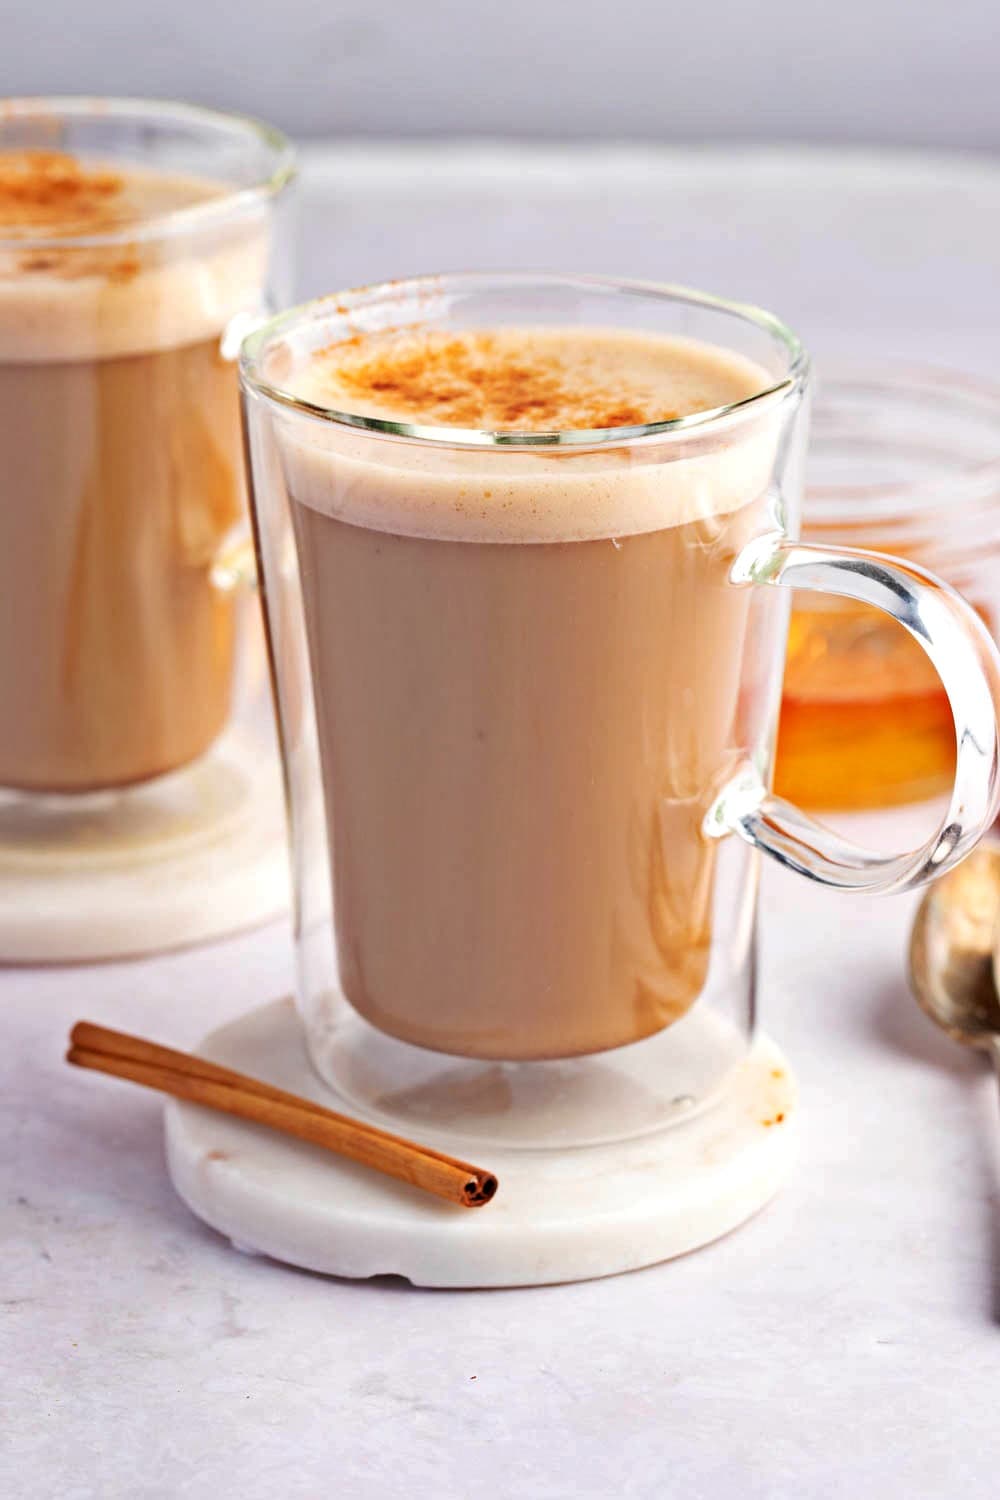 Honey Coffee (Easy and Delicious!) featuring Two Clear Mugs of Warm Homemade Honey Coffee with Cinnamon